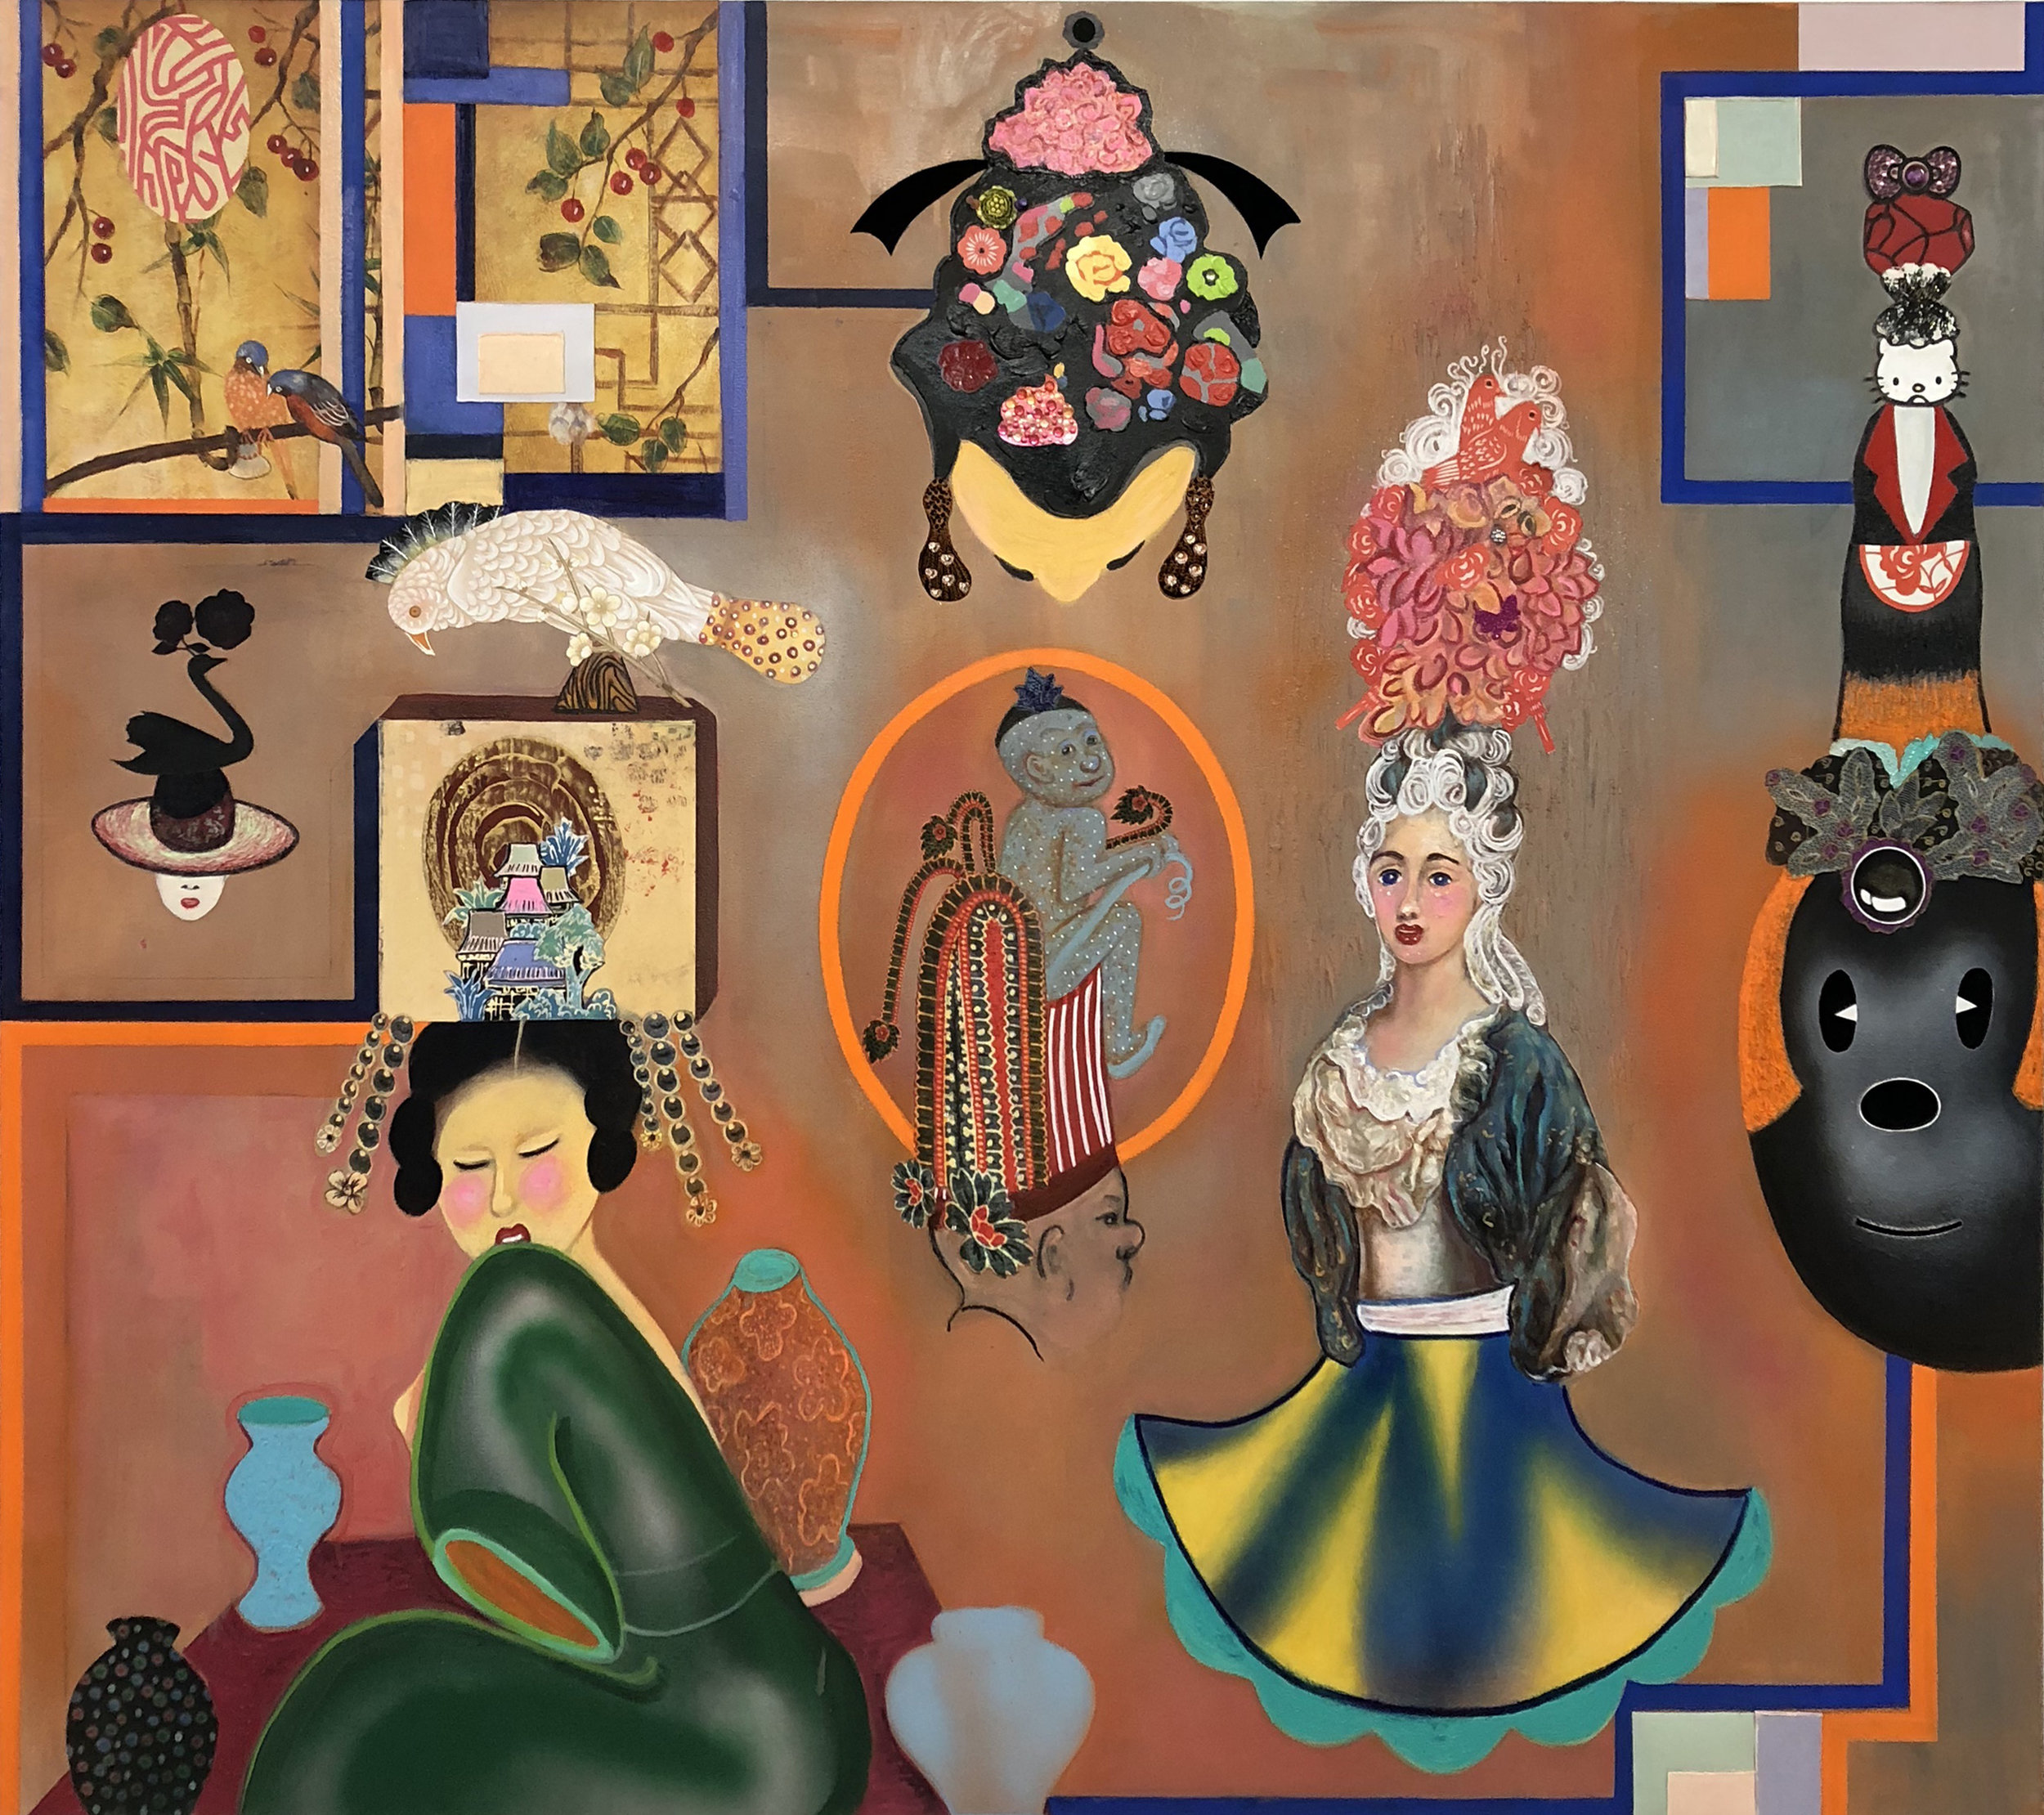 Fascinators, mixed media and collage on canvas, 60" x 70", 2018 